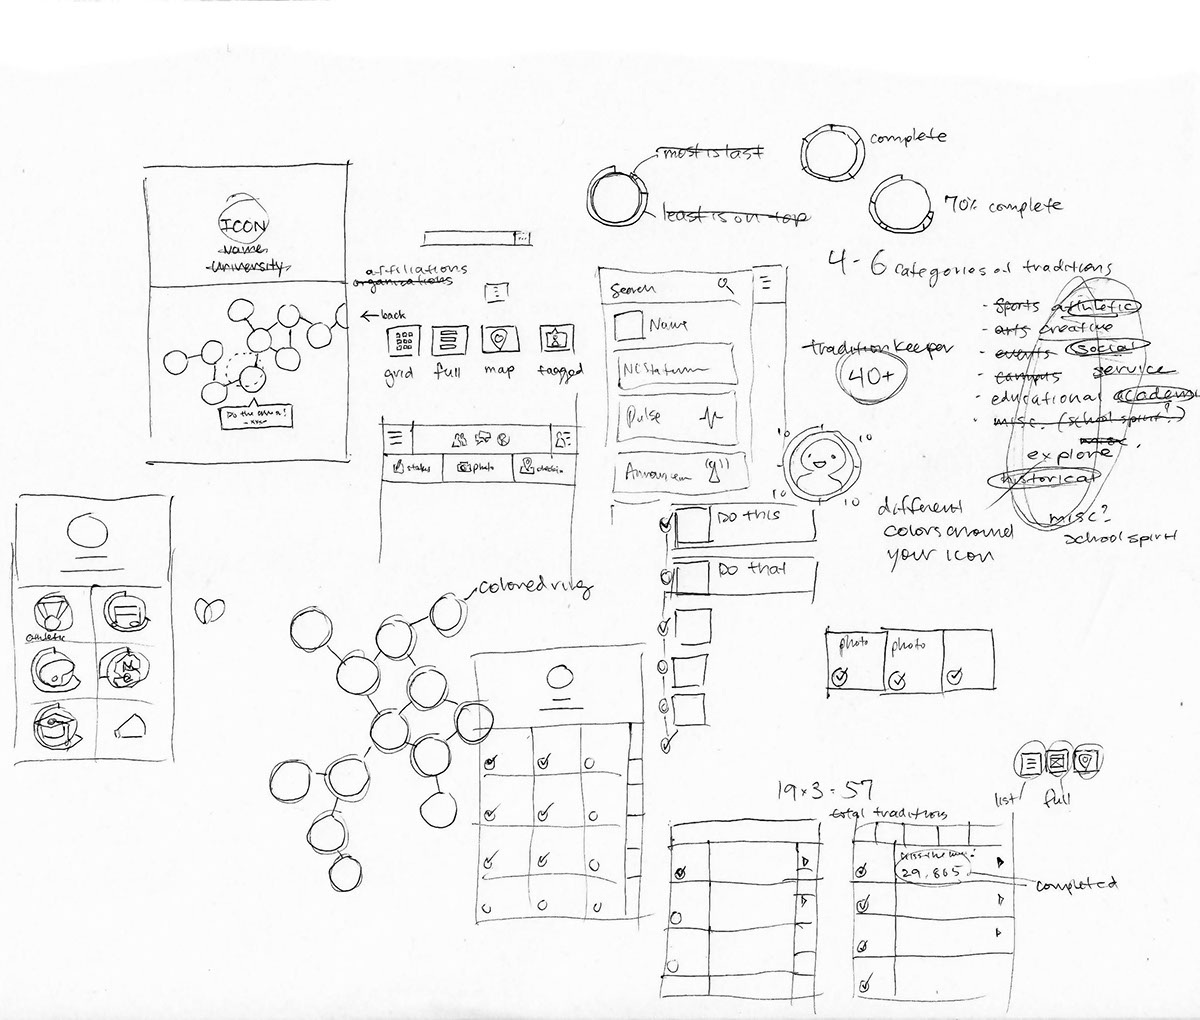 wireframing wireframes digital Interface Experience user research personas model value design process Prototyping prototype sketching